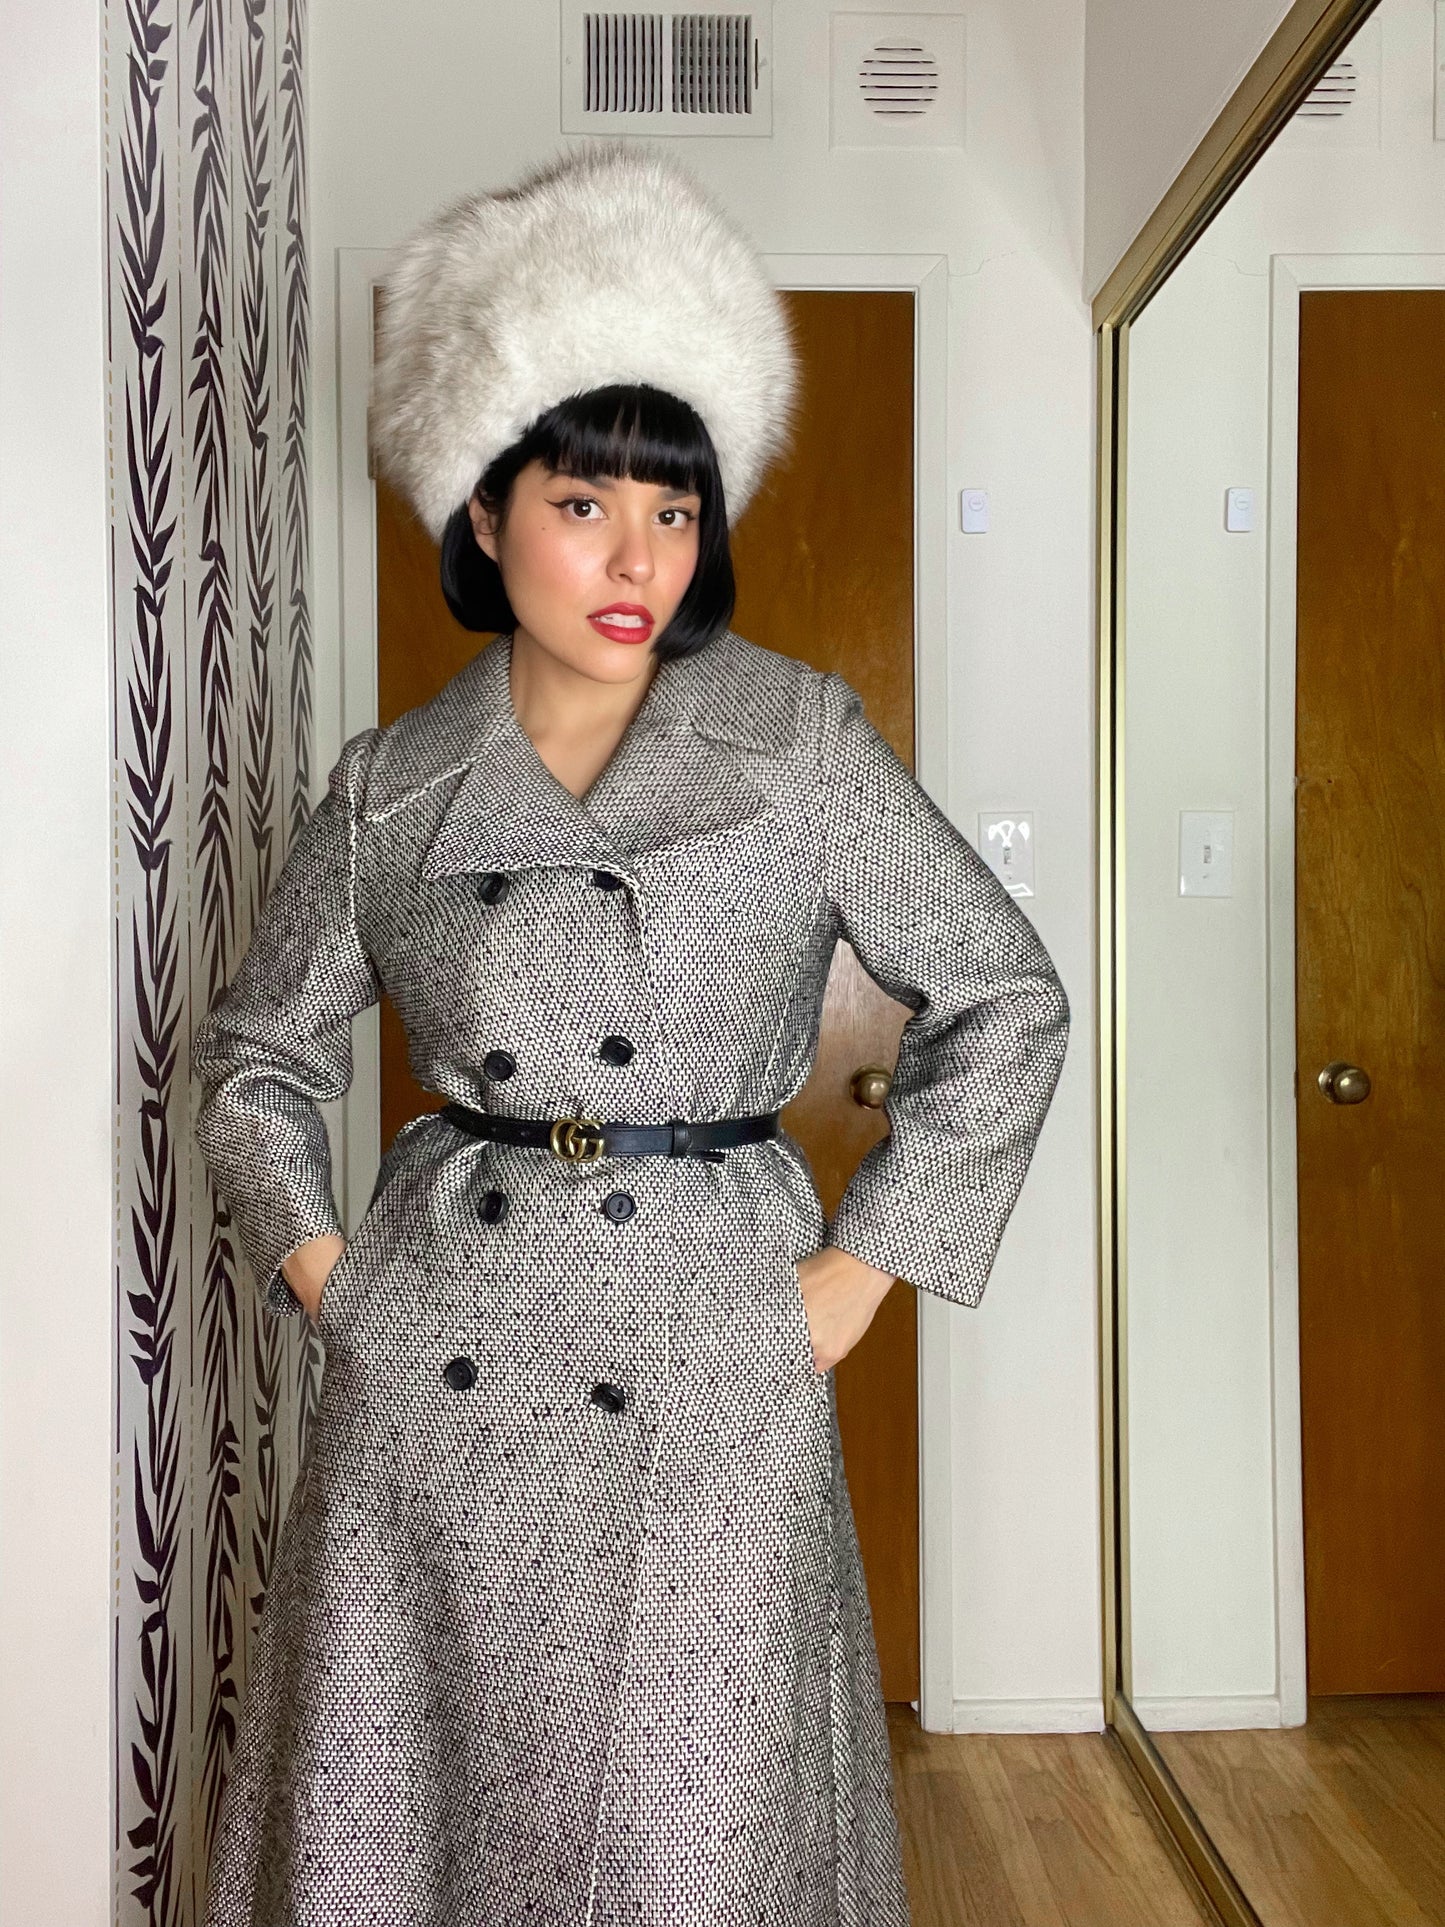 Vintage 50s 60s Black and White Woven Double Breasted Coat Best Fits Sizes XS-S, Possibly M